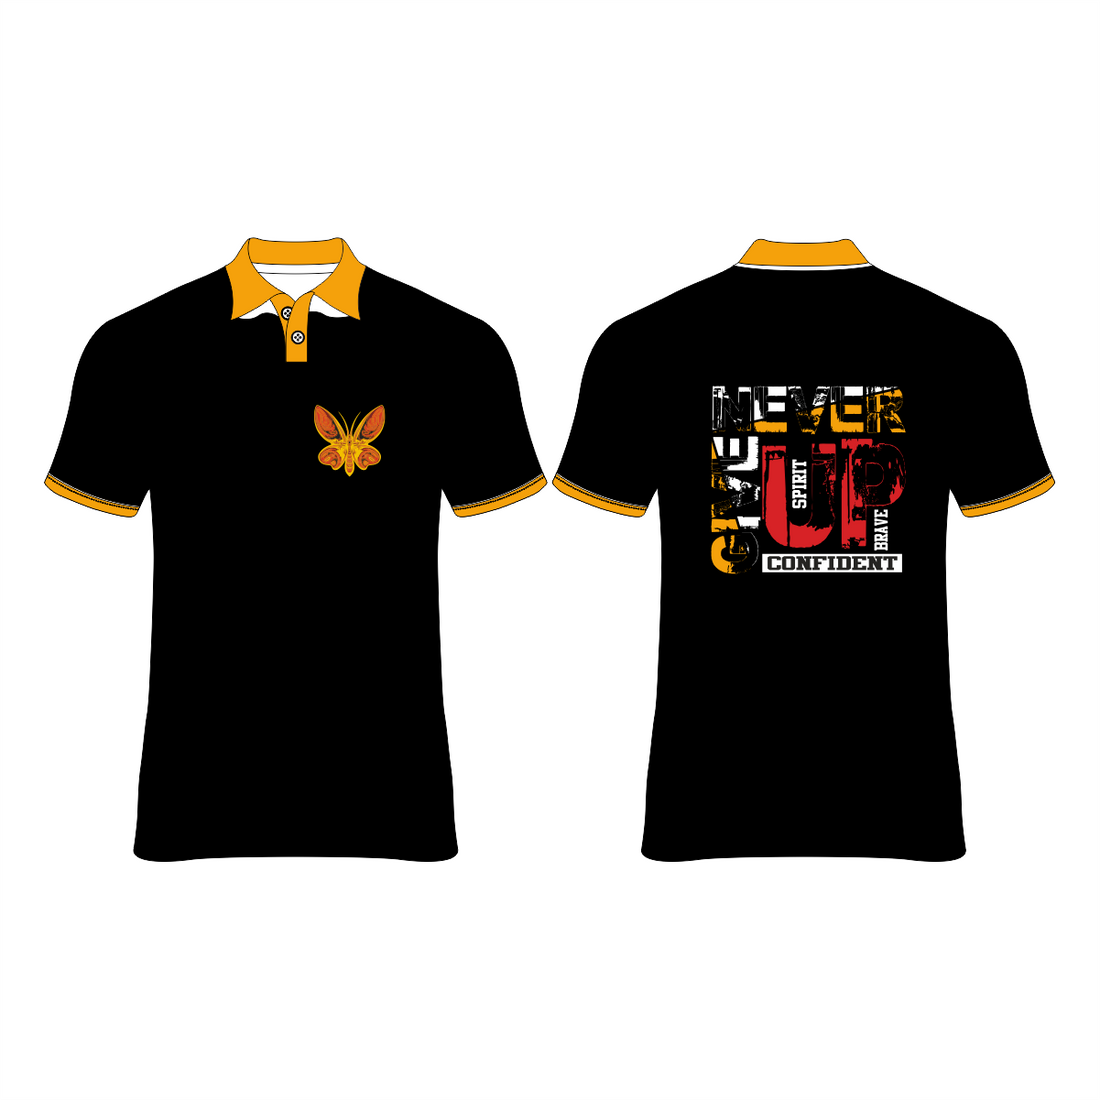 NEVER GIVE UP CONFIDENT  PRINTED T-SHIRT